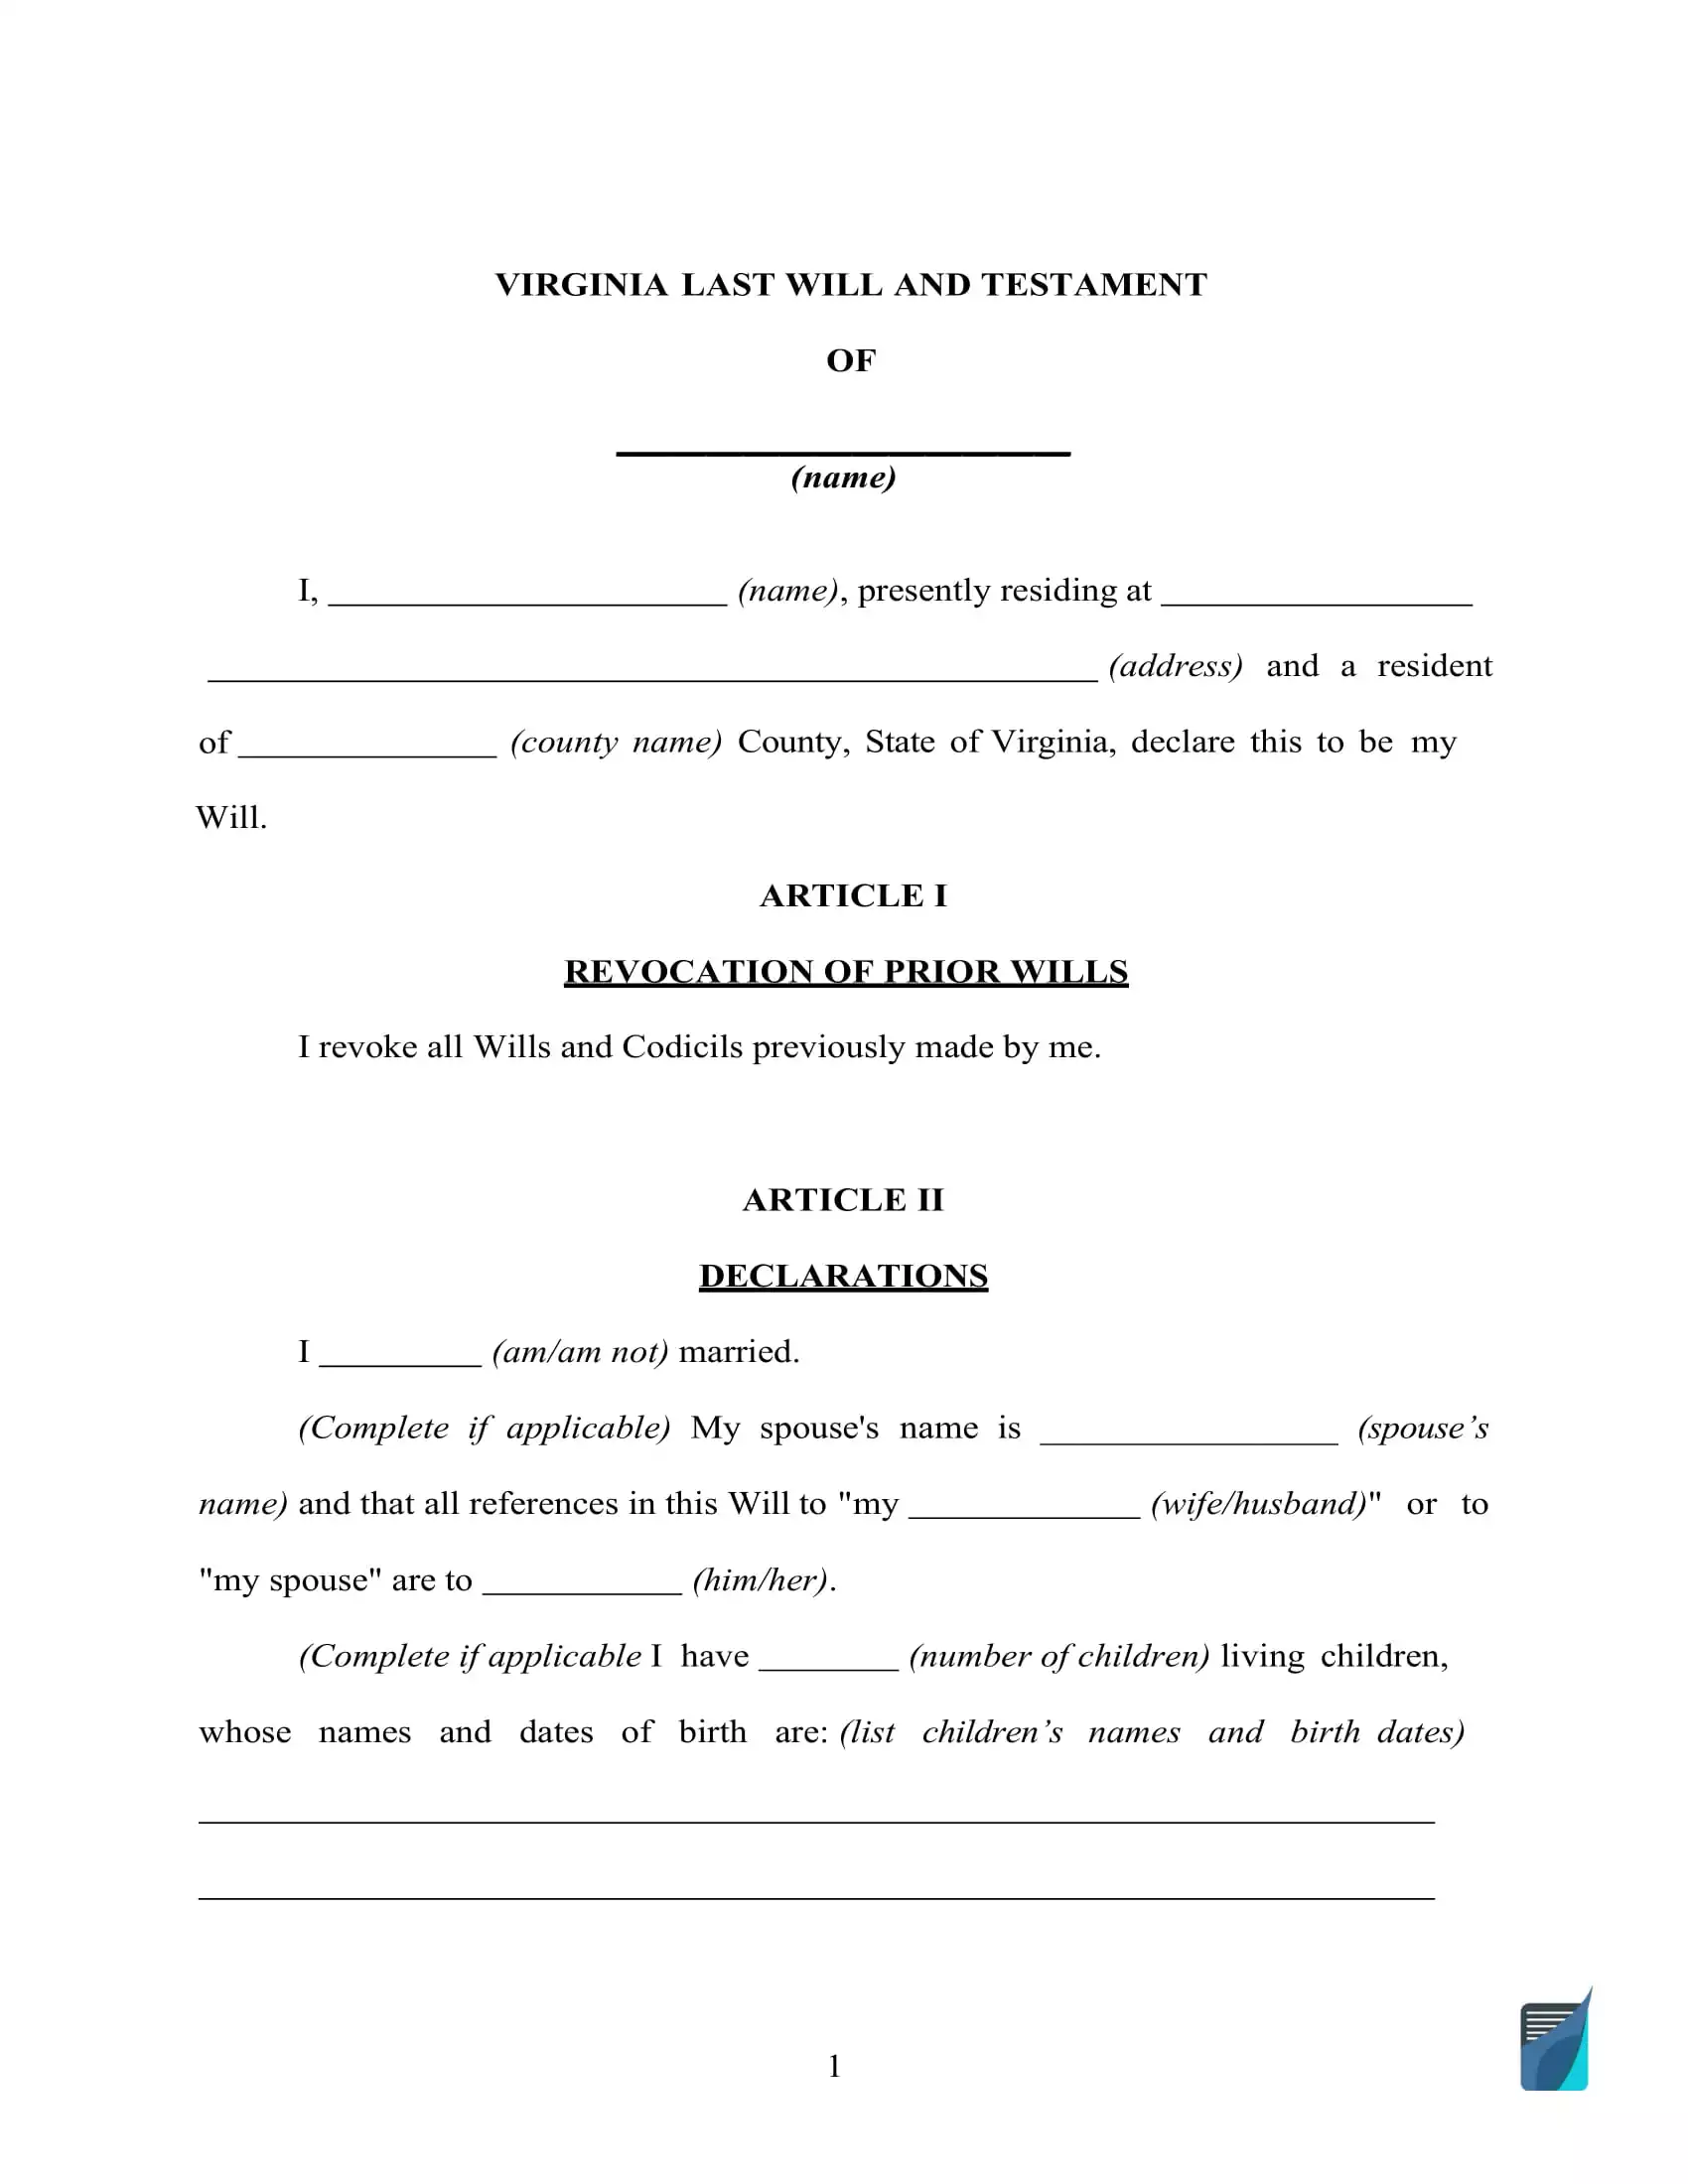 virginia-last-will-and-testament-template